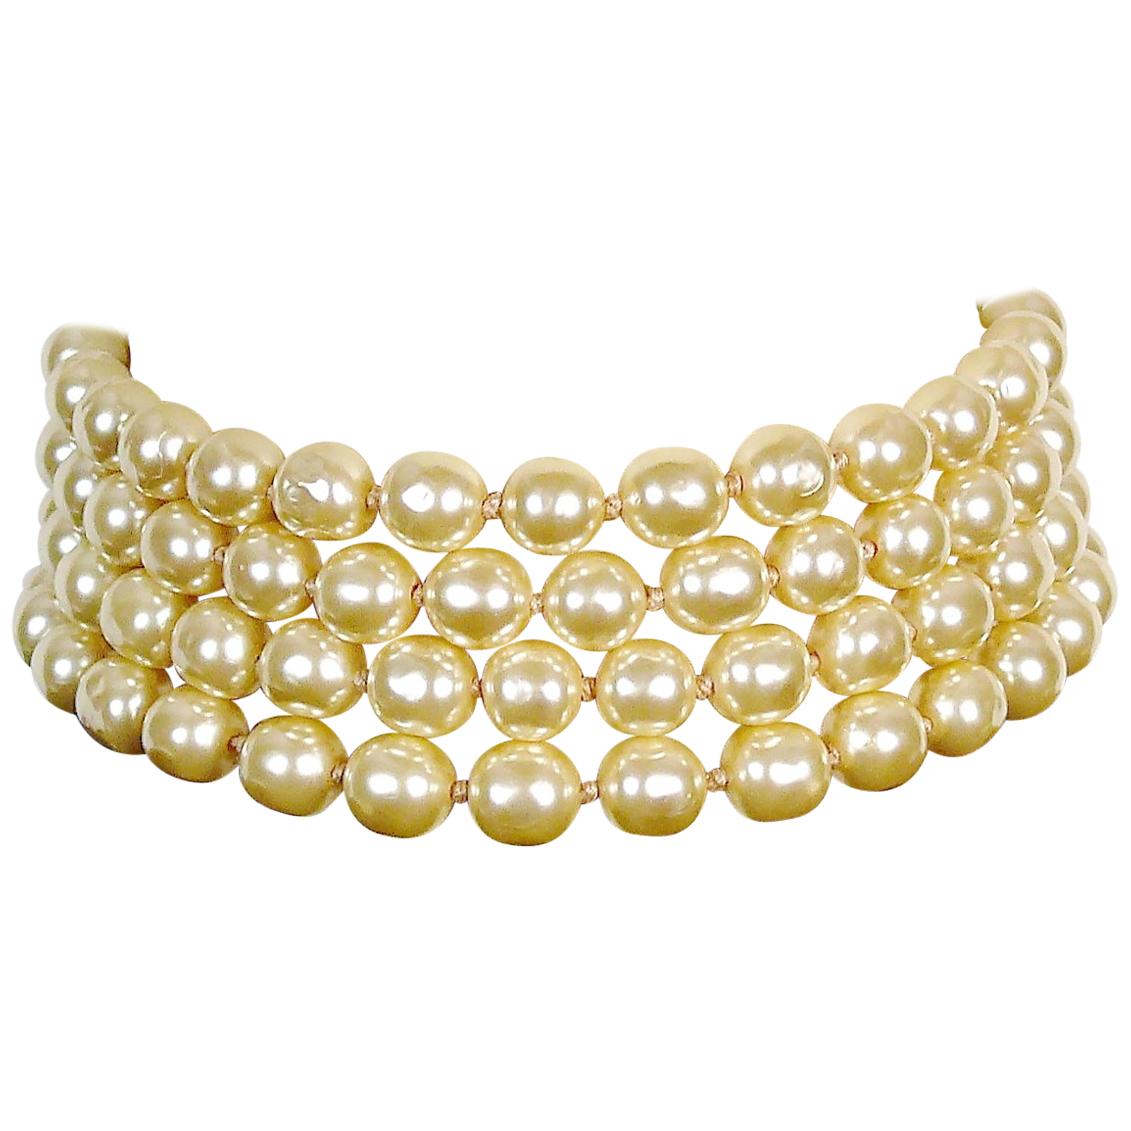 Karl Lagerfeld Vintage Multi Layer Pearl Choker Necklace